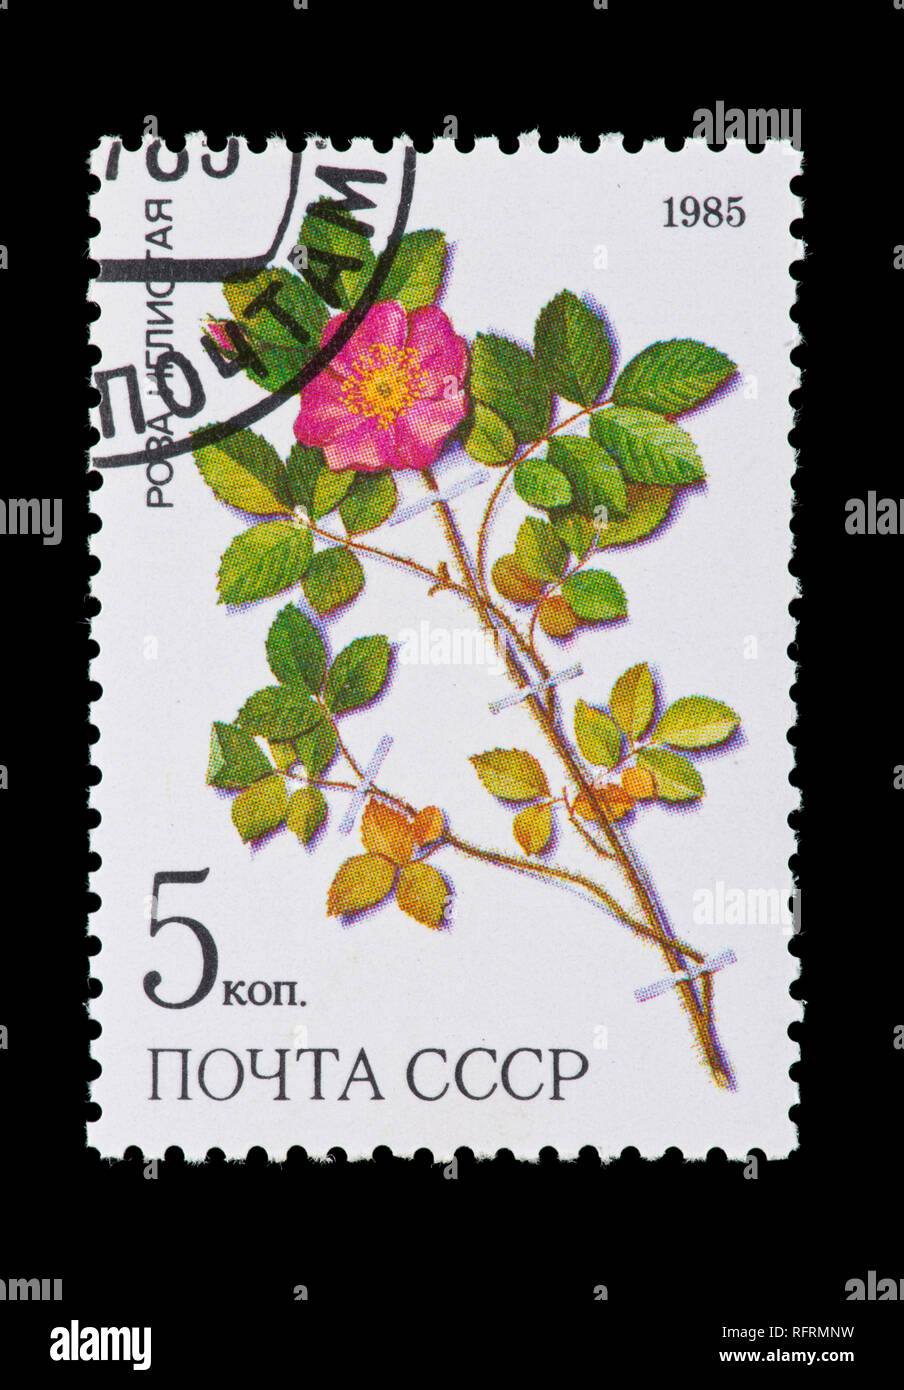 Postage stamp from the Soviet Union (USSR) depicting Rosa acicularis lindi, medicinal plant from Siberia. Stock Photo